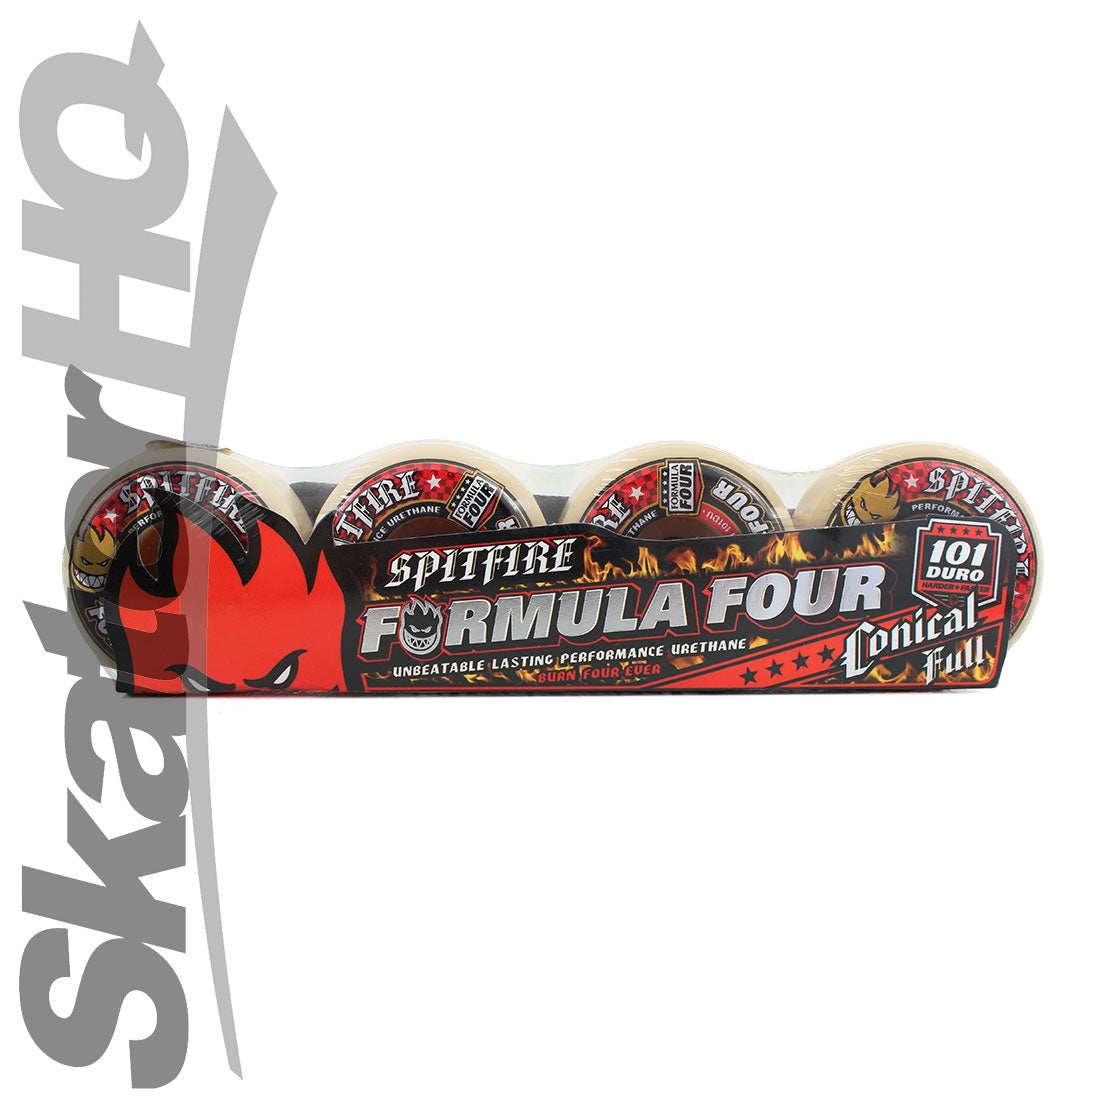 Spitfire Form Four 53mm 101A Conical Full - Red Skateboard Wheels